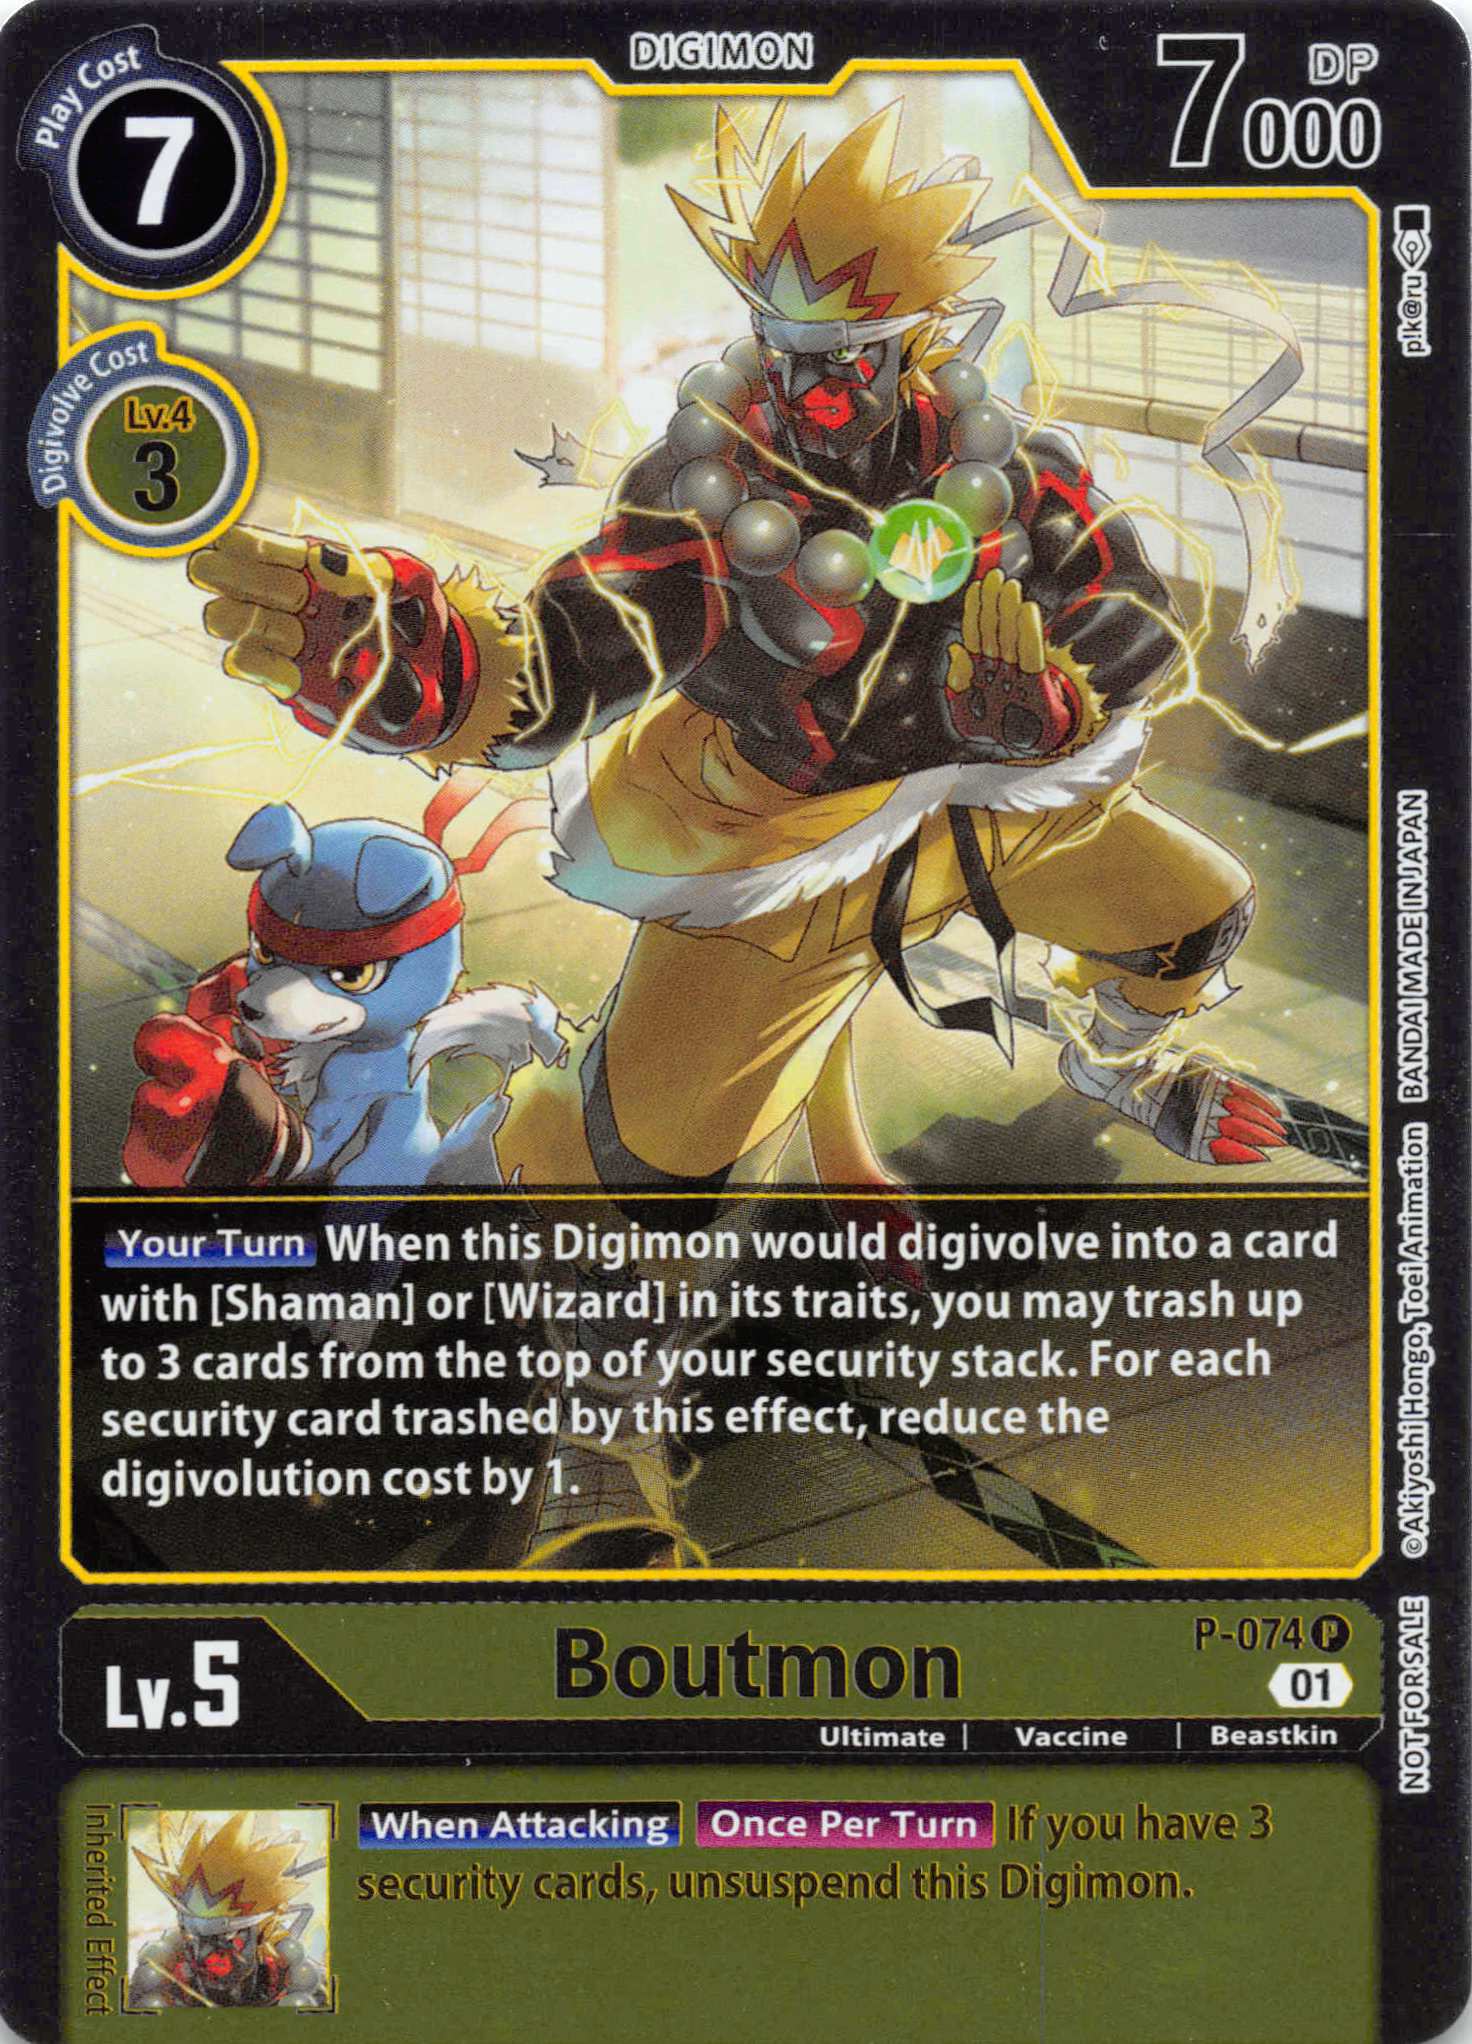 Boutmon [P-074] [Digimon Promotion Cards] Normal